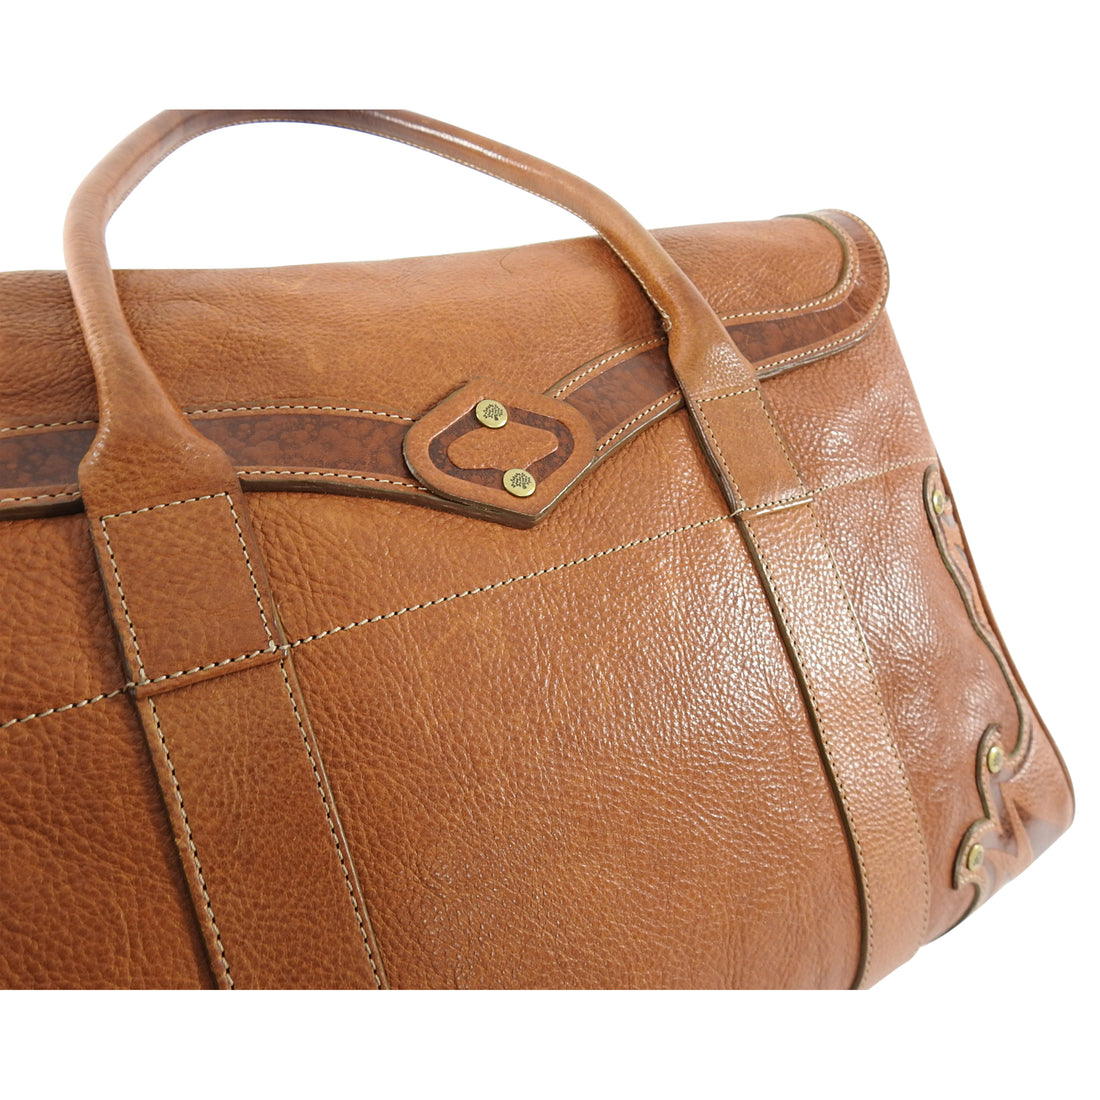 Mulberry Brown Leather Bayswater Classic Tote Bag